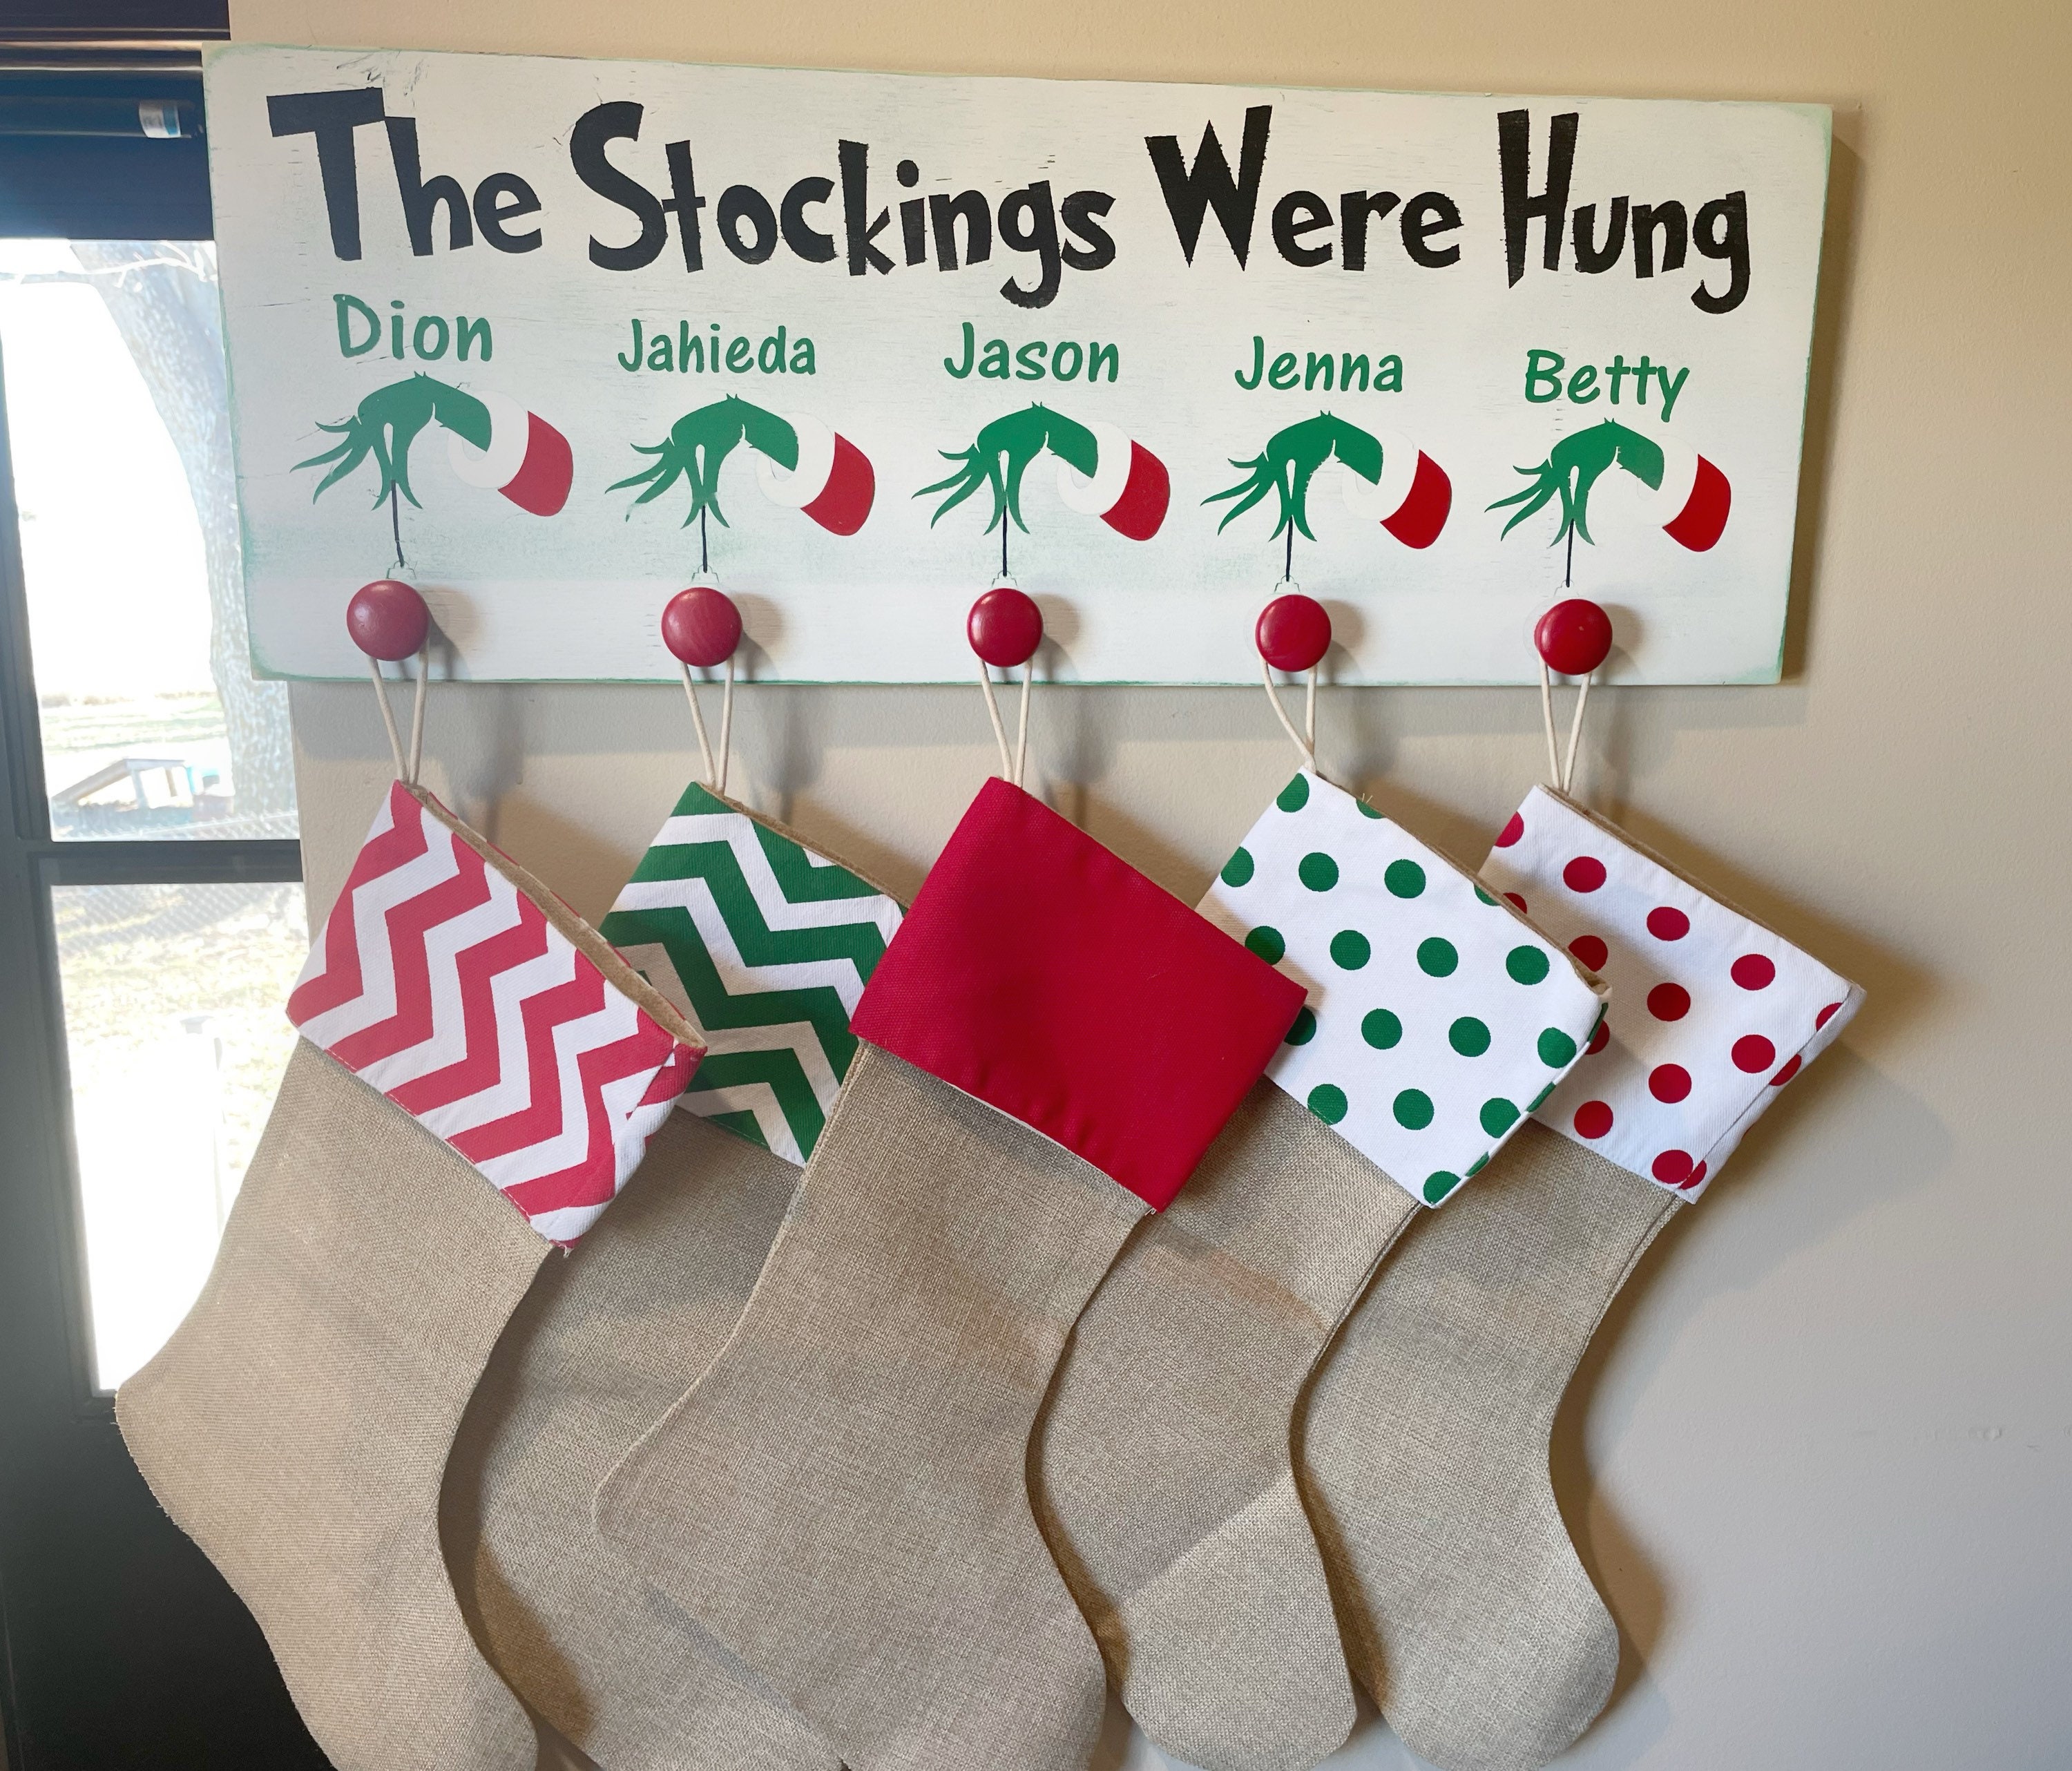 Dont let your parents be neglected this holiday szn. Show them some st, dad  stocking ideas